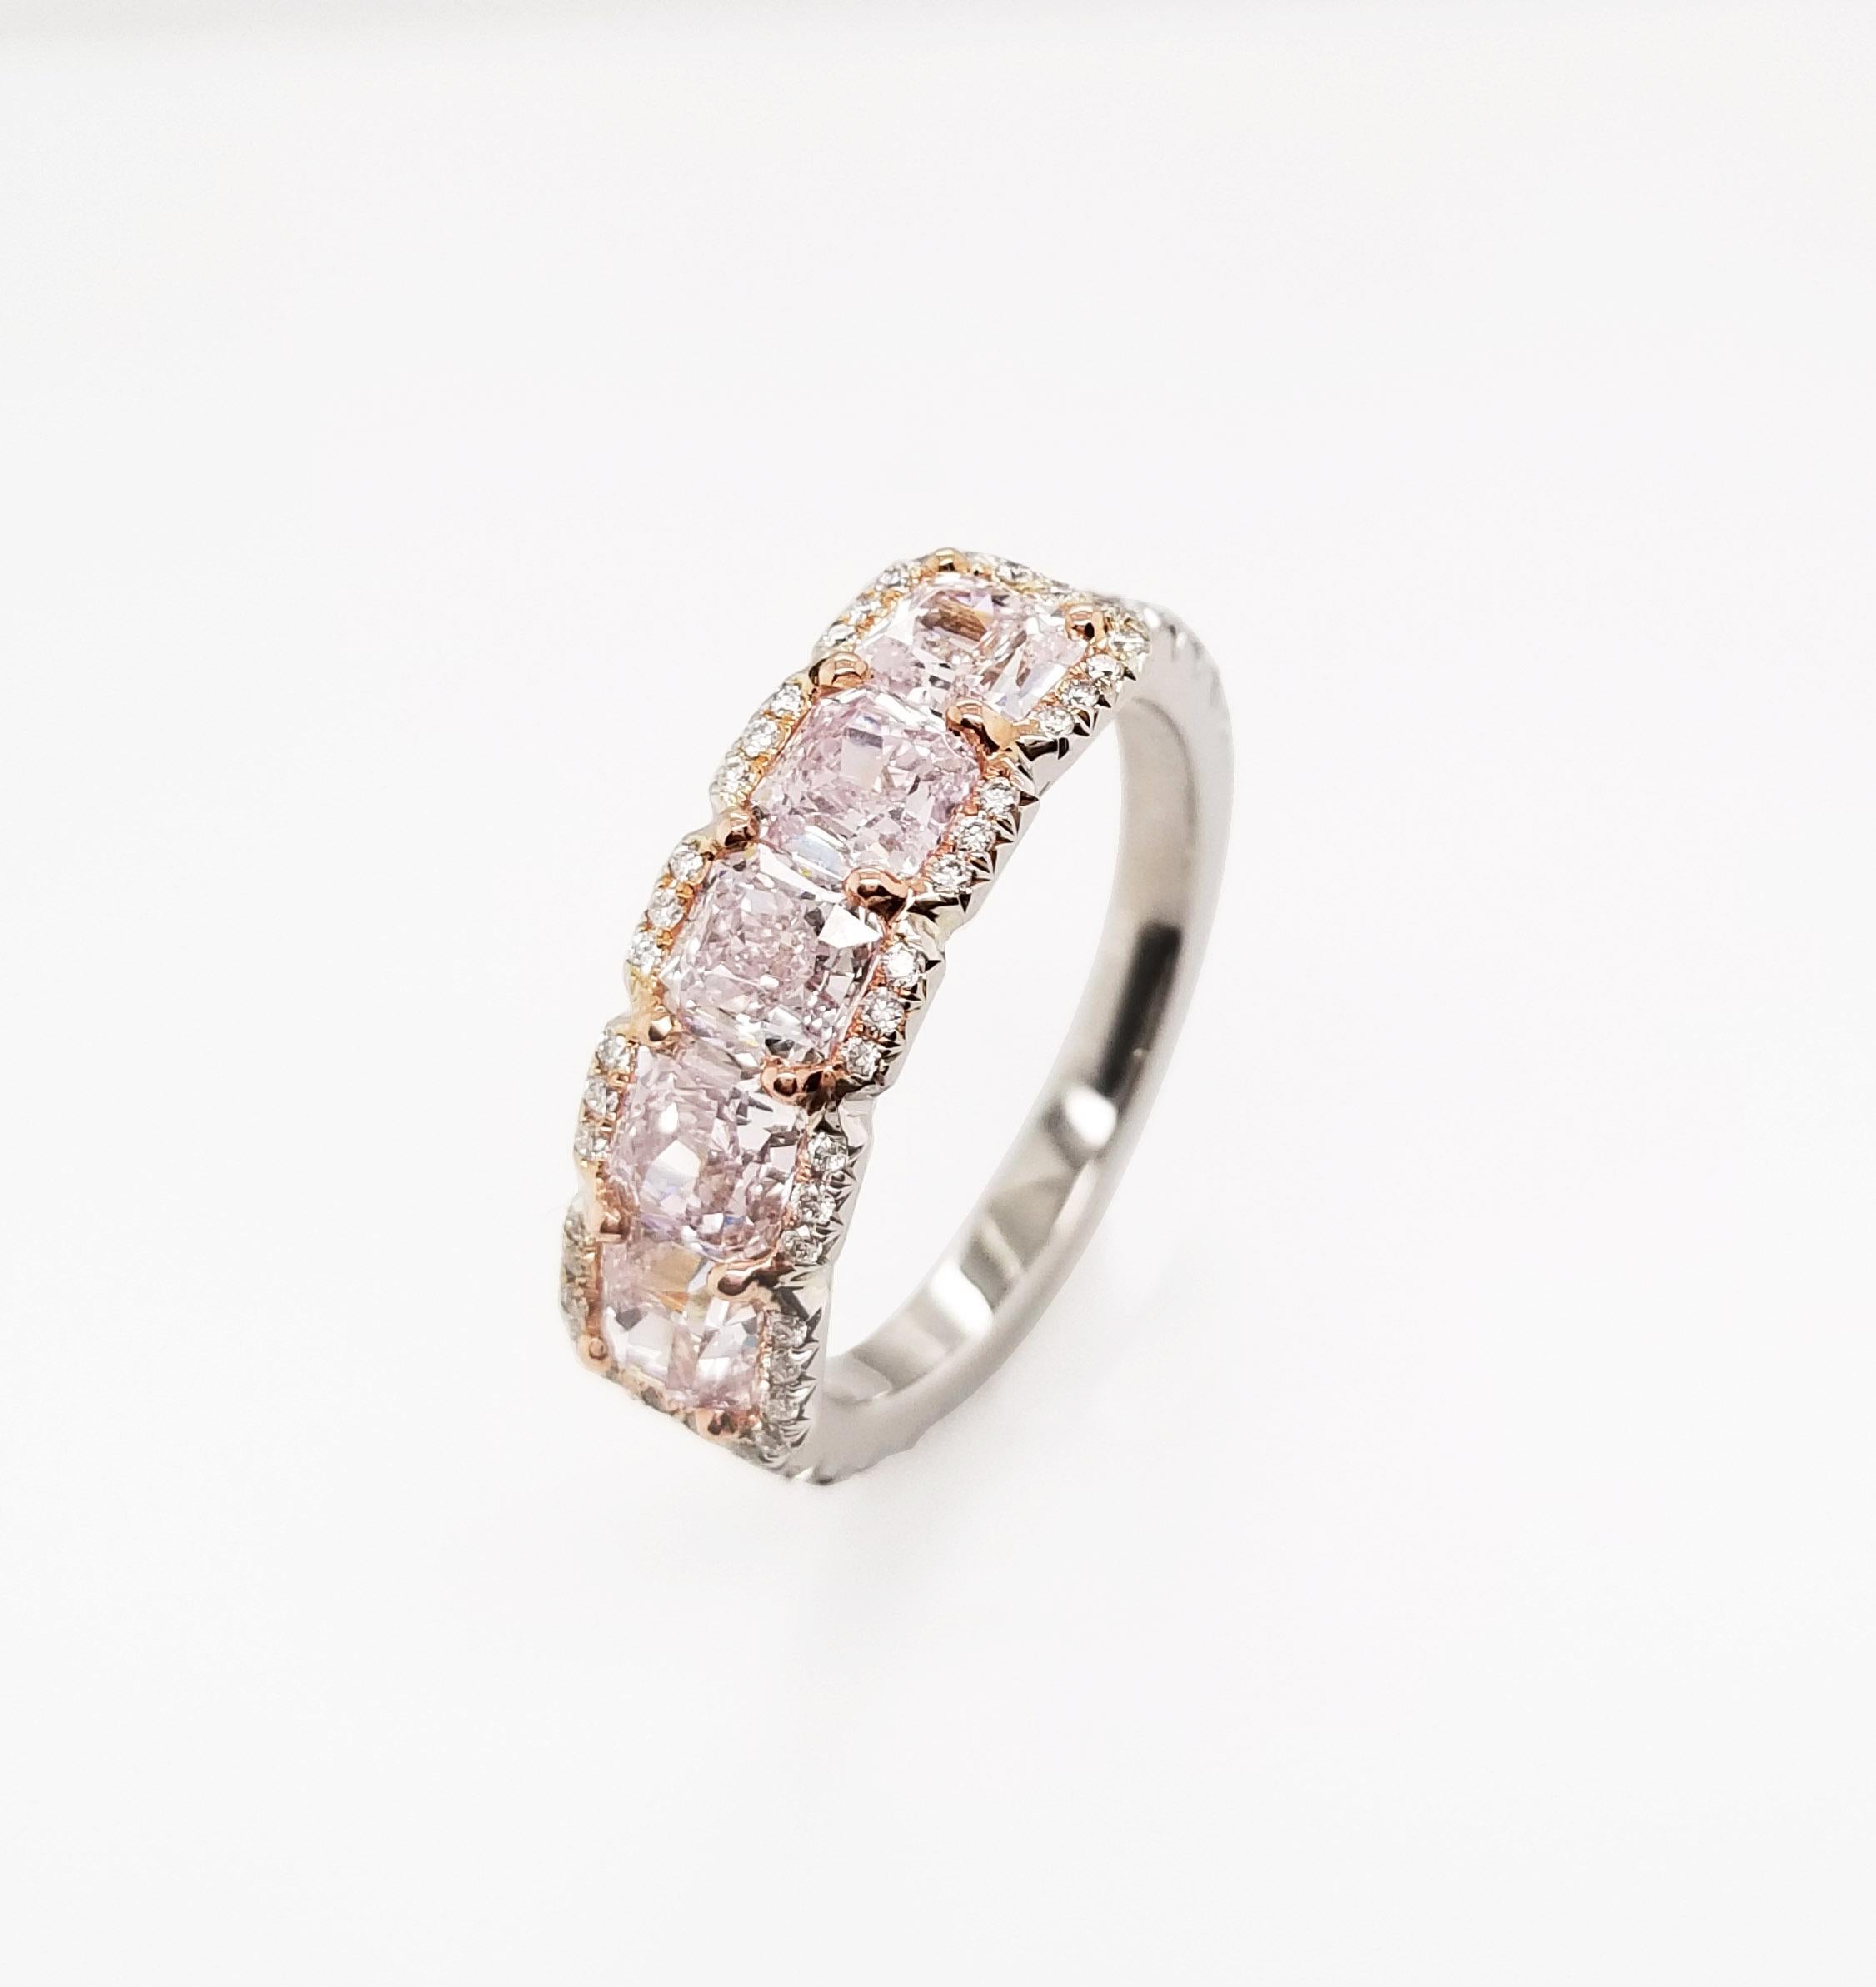 Scarselli features an exclusive five stone statement ring set in Platinum and 18k Rose Gold. This ring contains natural pink colored diamonds with VVS1-SI1 clarity. The pink diamonds are GIA certified, with a total combined weight of 2.17 carats.